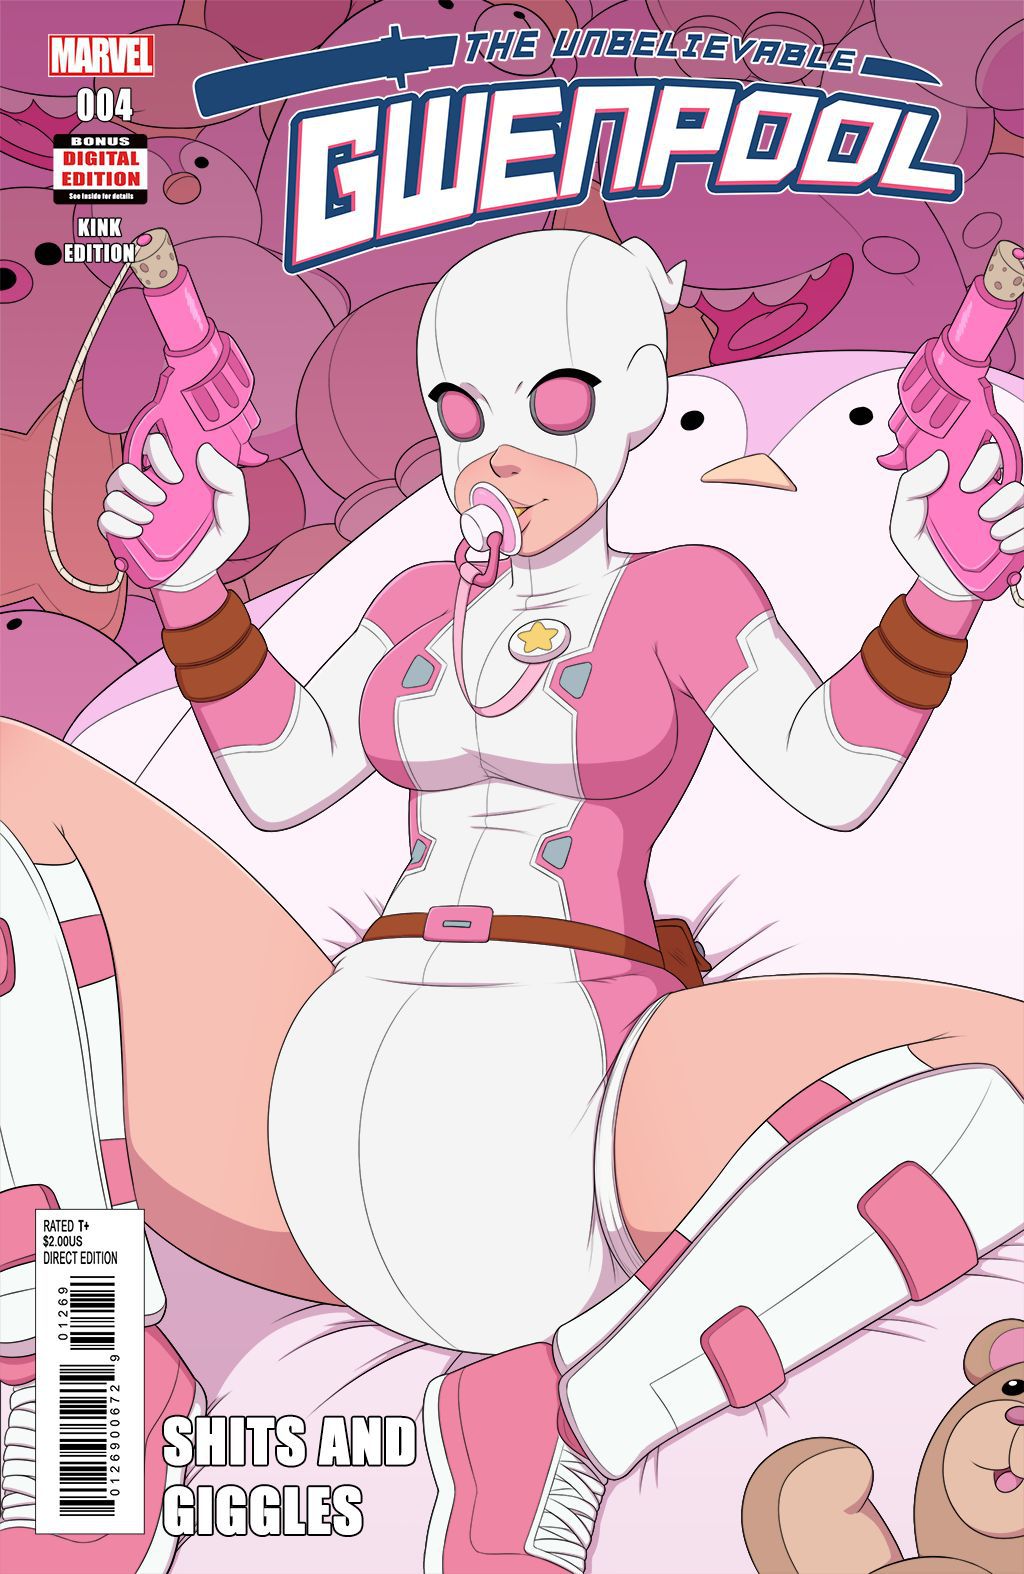 [PieceofSoap] Shits and Giggles (Gwenpool) [Ongoing] 1